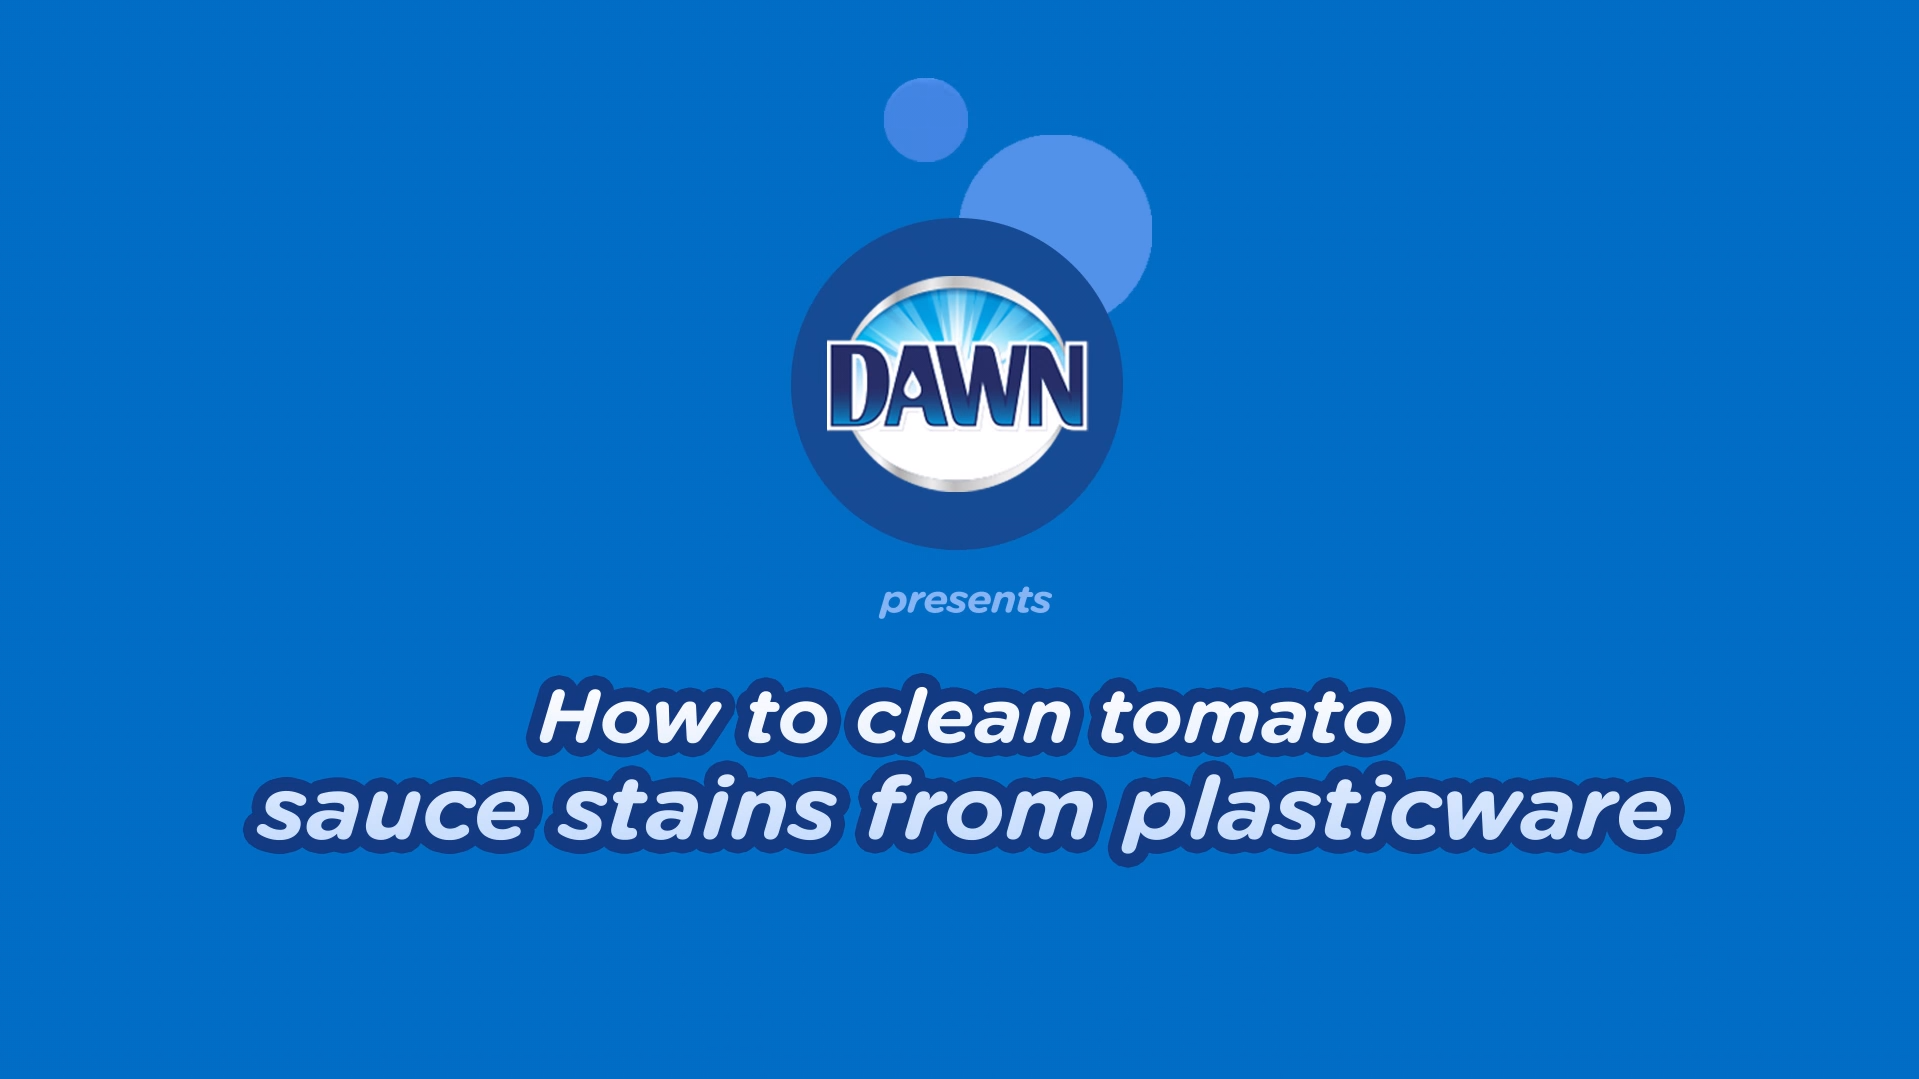 Keep pasta sauce from staining your plastic ware by spraying the